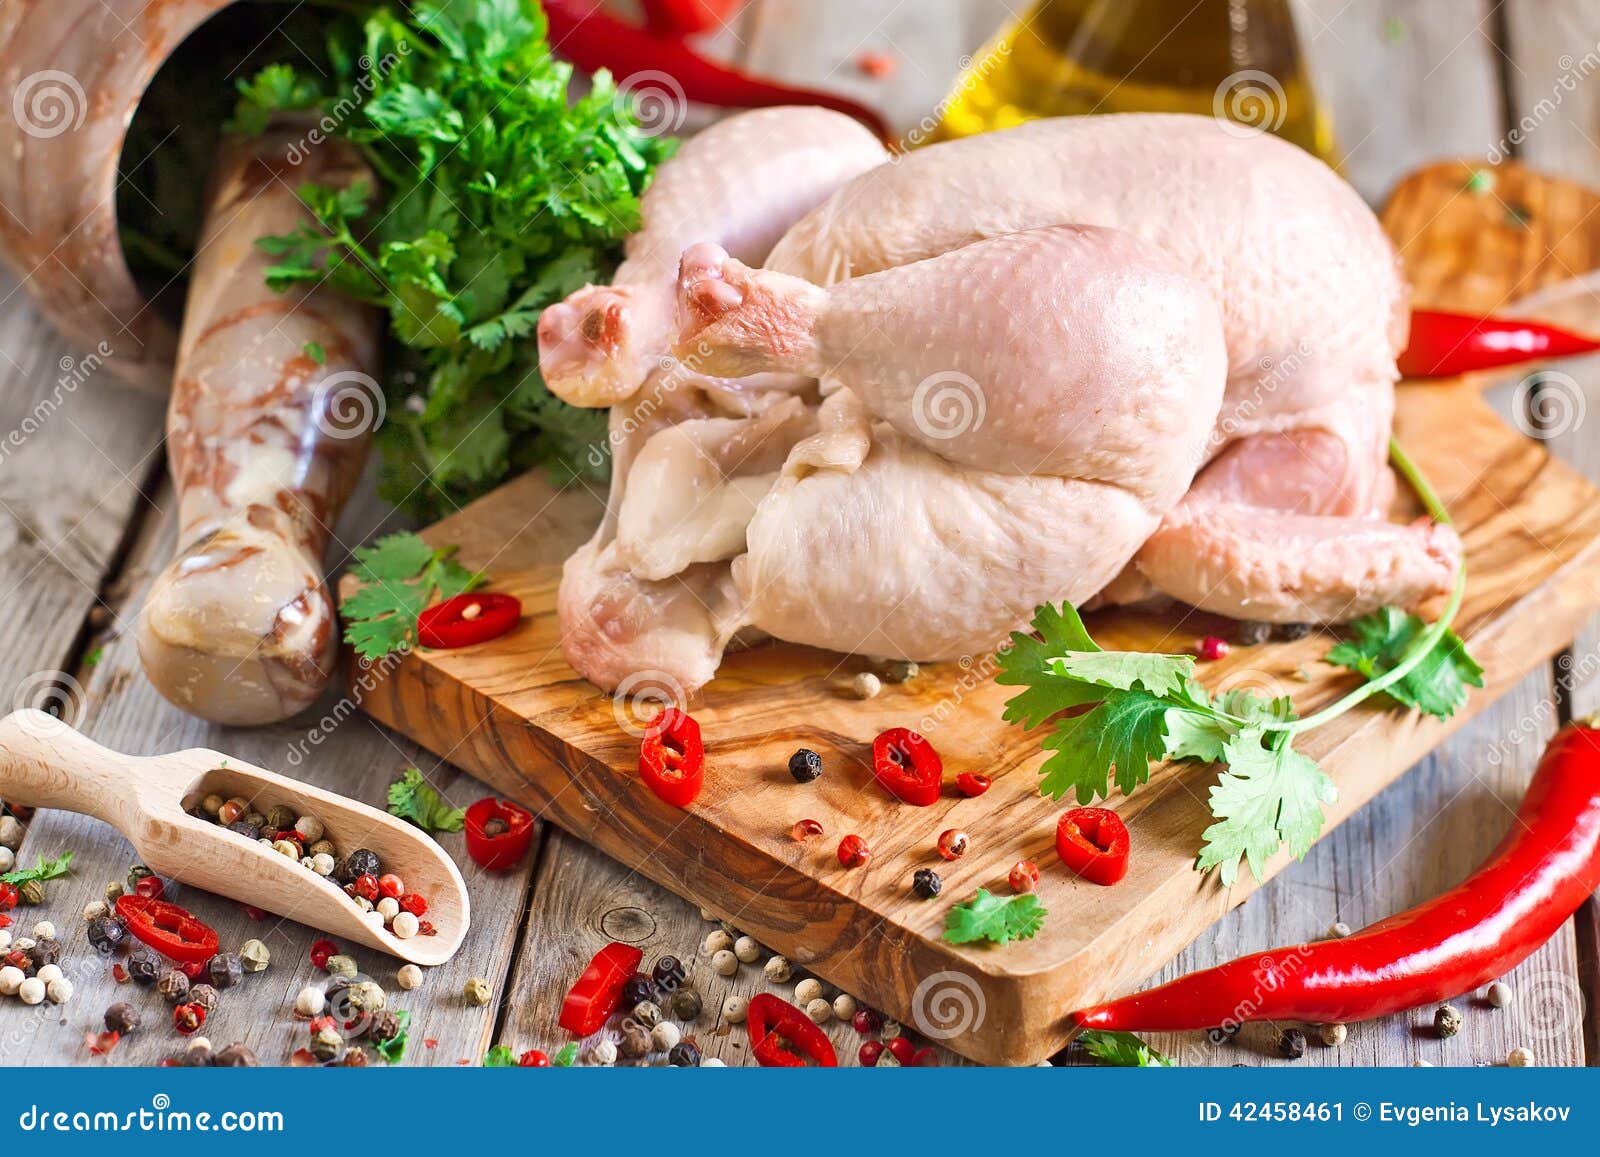 Raw chicken stock image. Image of farm, lunch, ingredient - 42458461